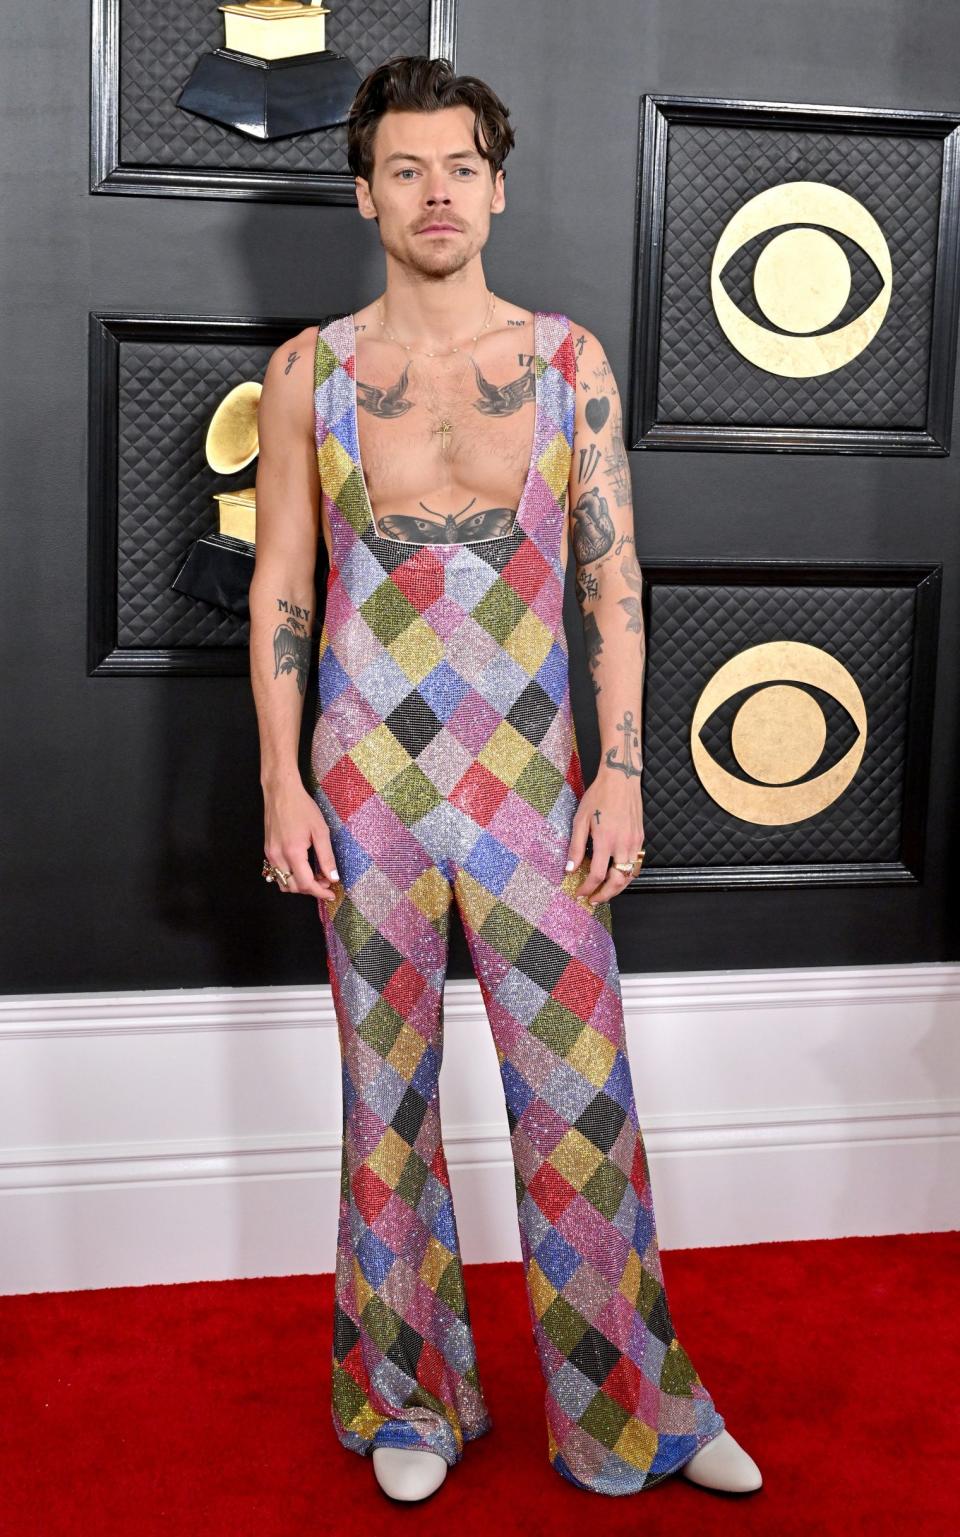 Harry Styles attends the 65th Annual Grammy Awards on February 5, 2023 in Los Angeles, California